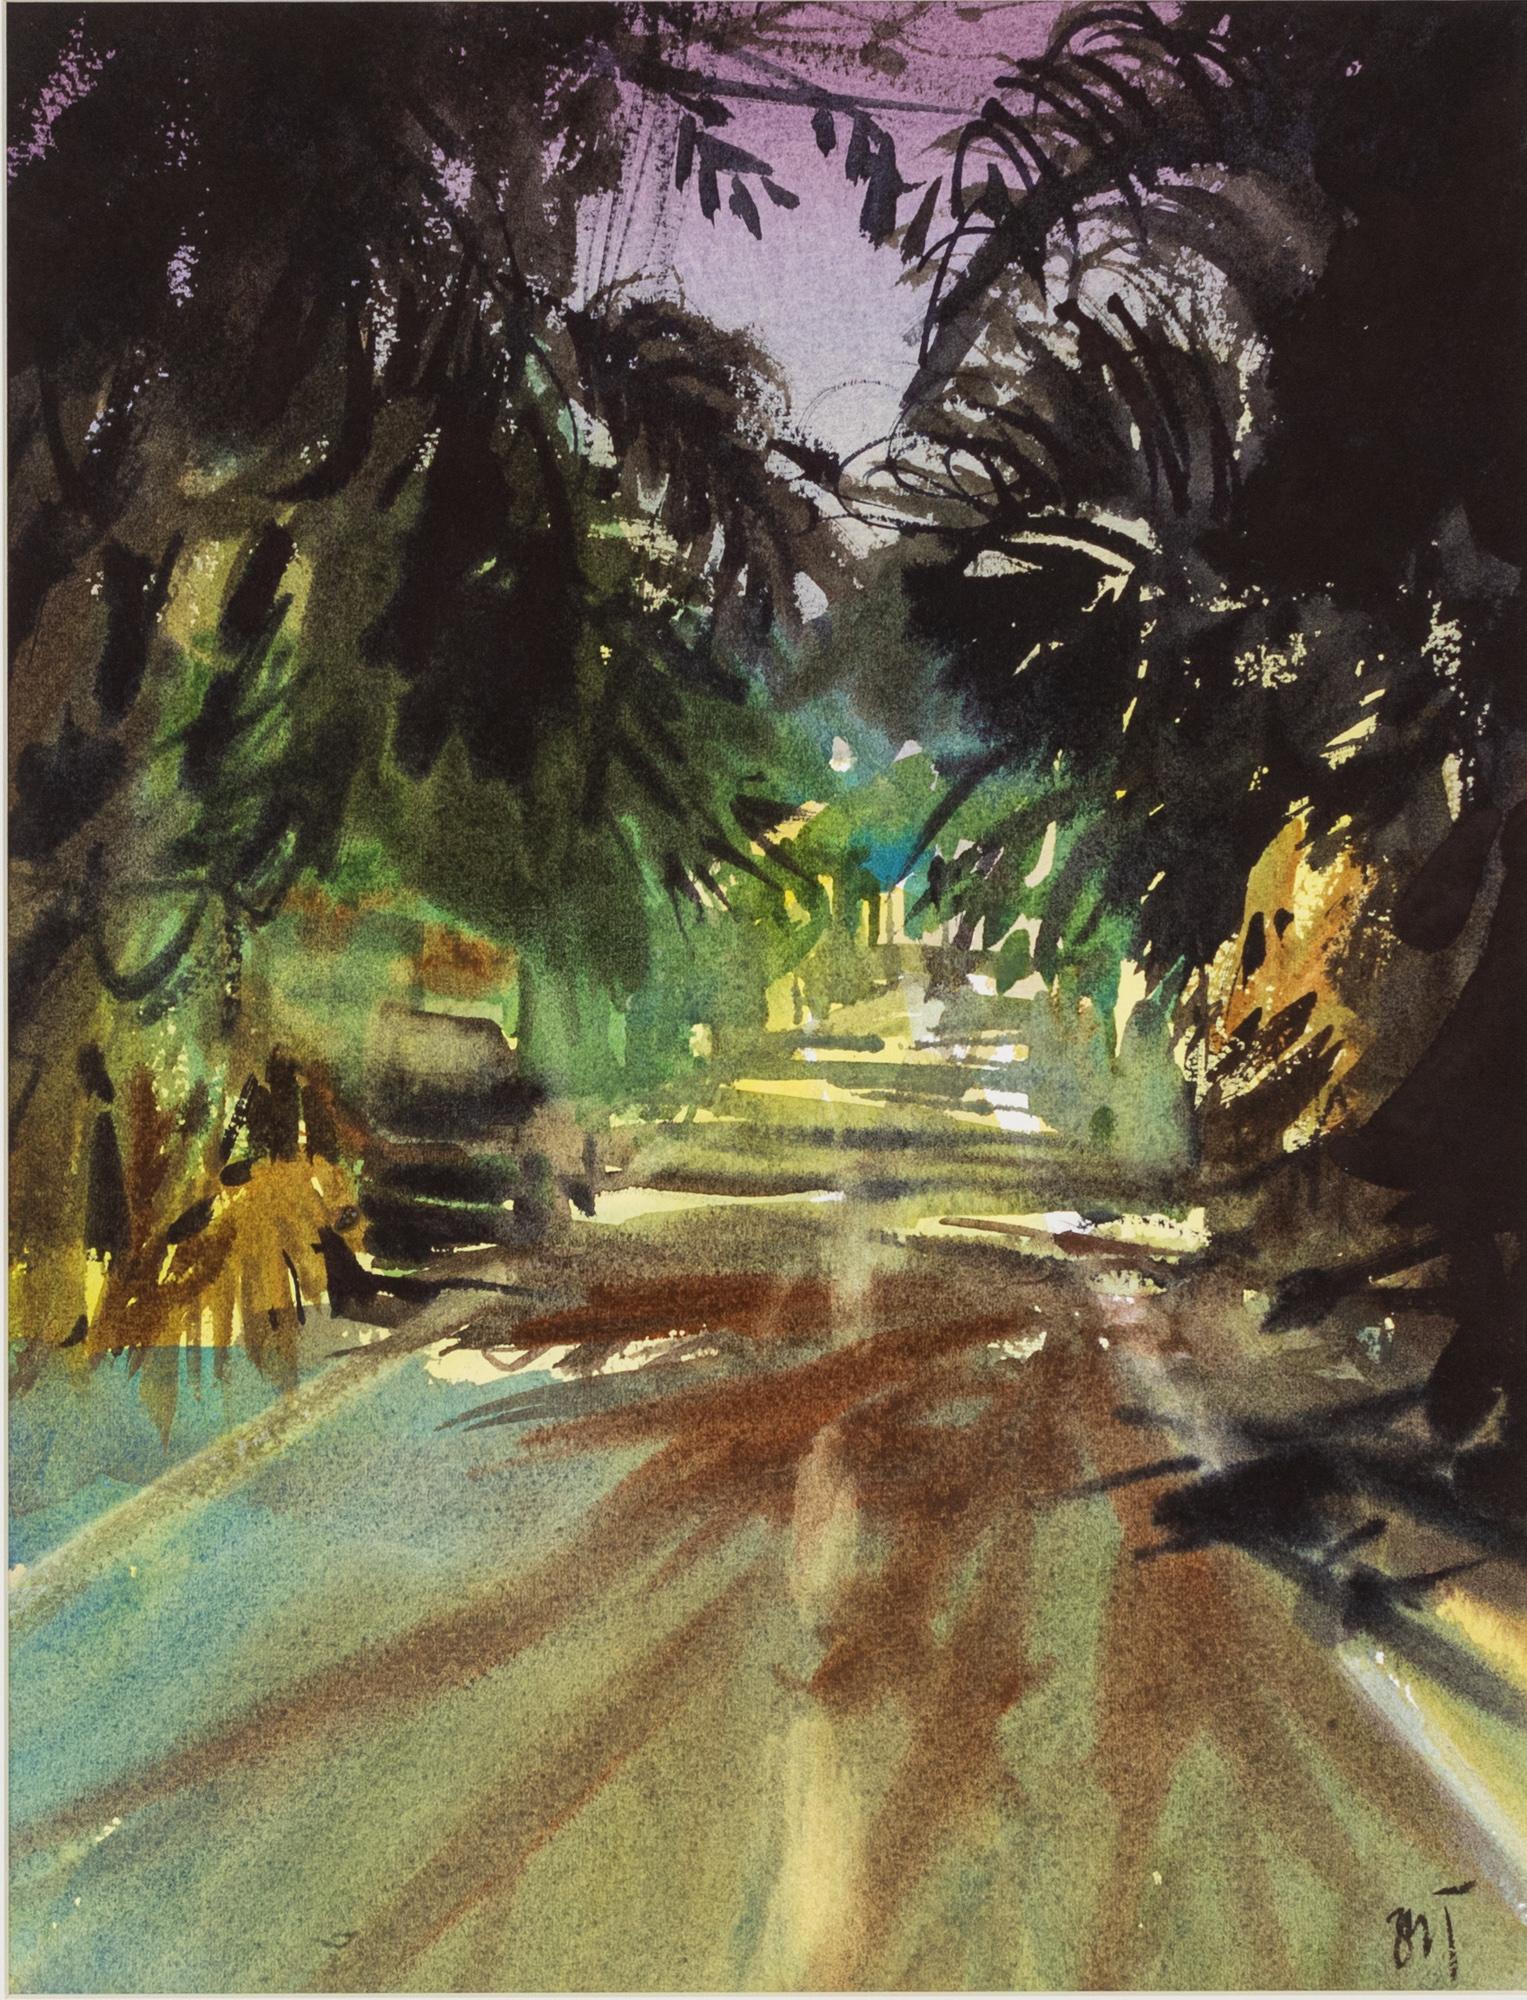 Uma Kelkar Landscape Painting - "Late Evening Stroll" A Watercolor Painting of a Tropical Road in Pune, India